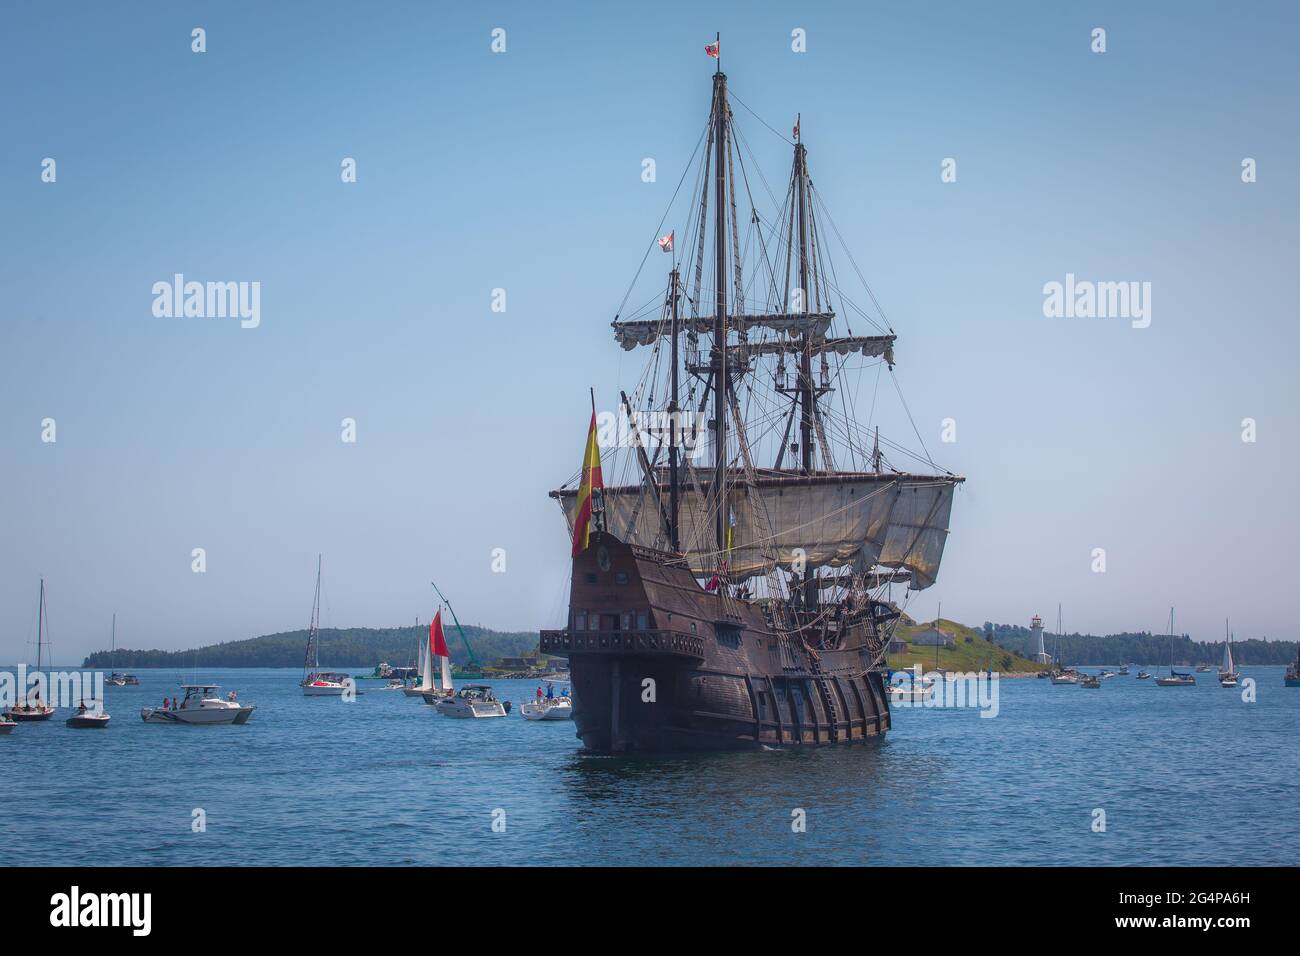 El Galeon at Tall ships participating in a parade of sails as part of Rendezvous 2017 in Halifax on Aug. 1, 2017 during the Tall Ships festival Stock Photo